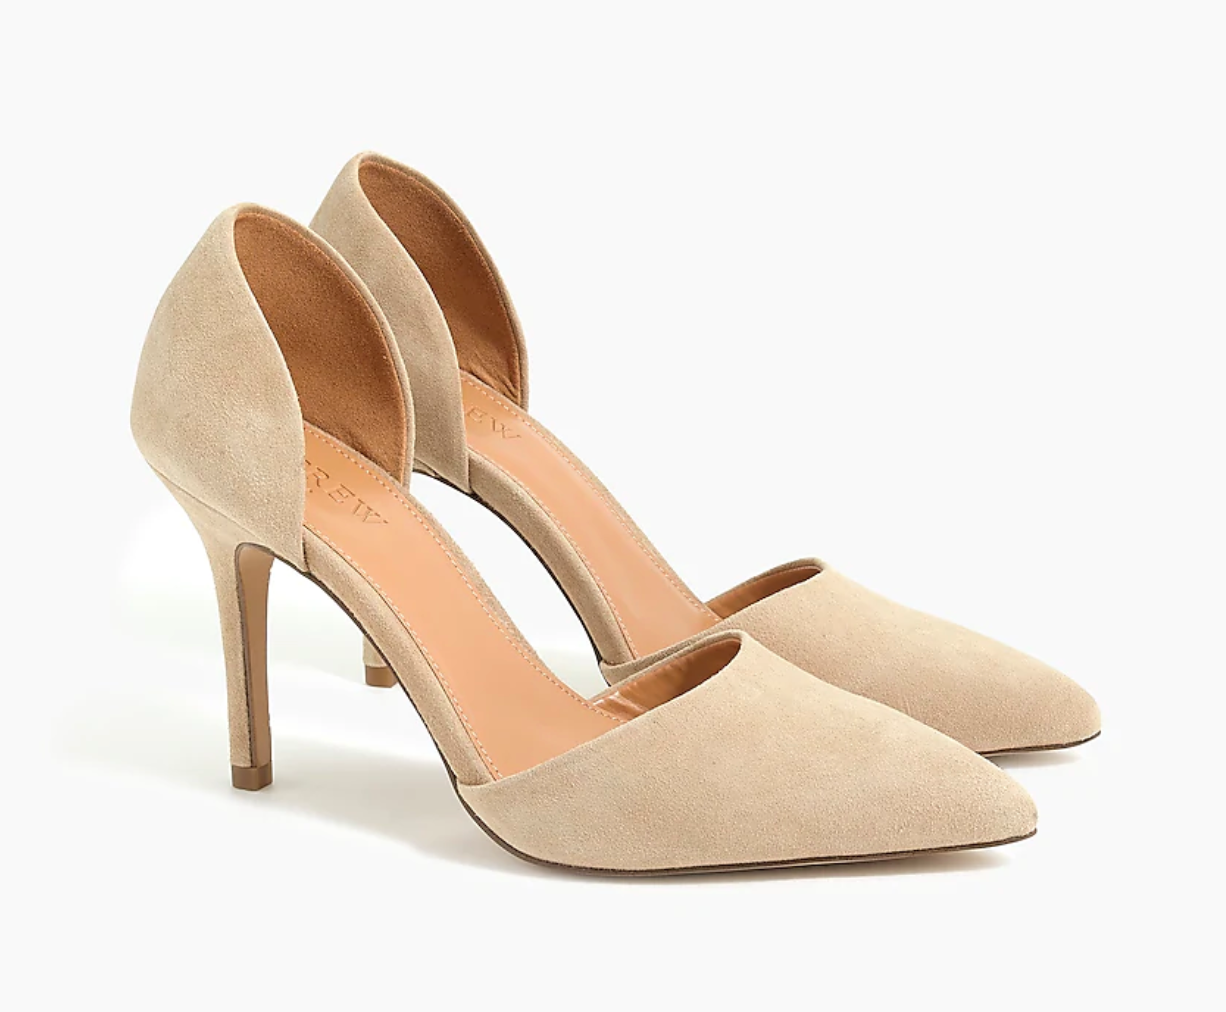 The nude pumps